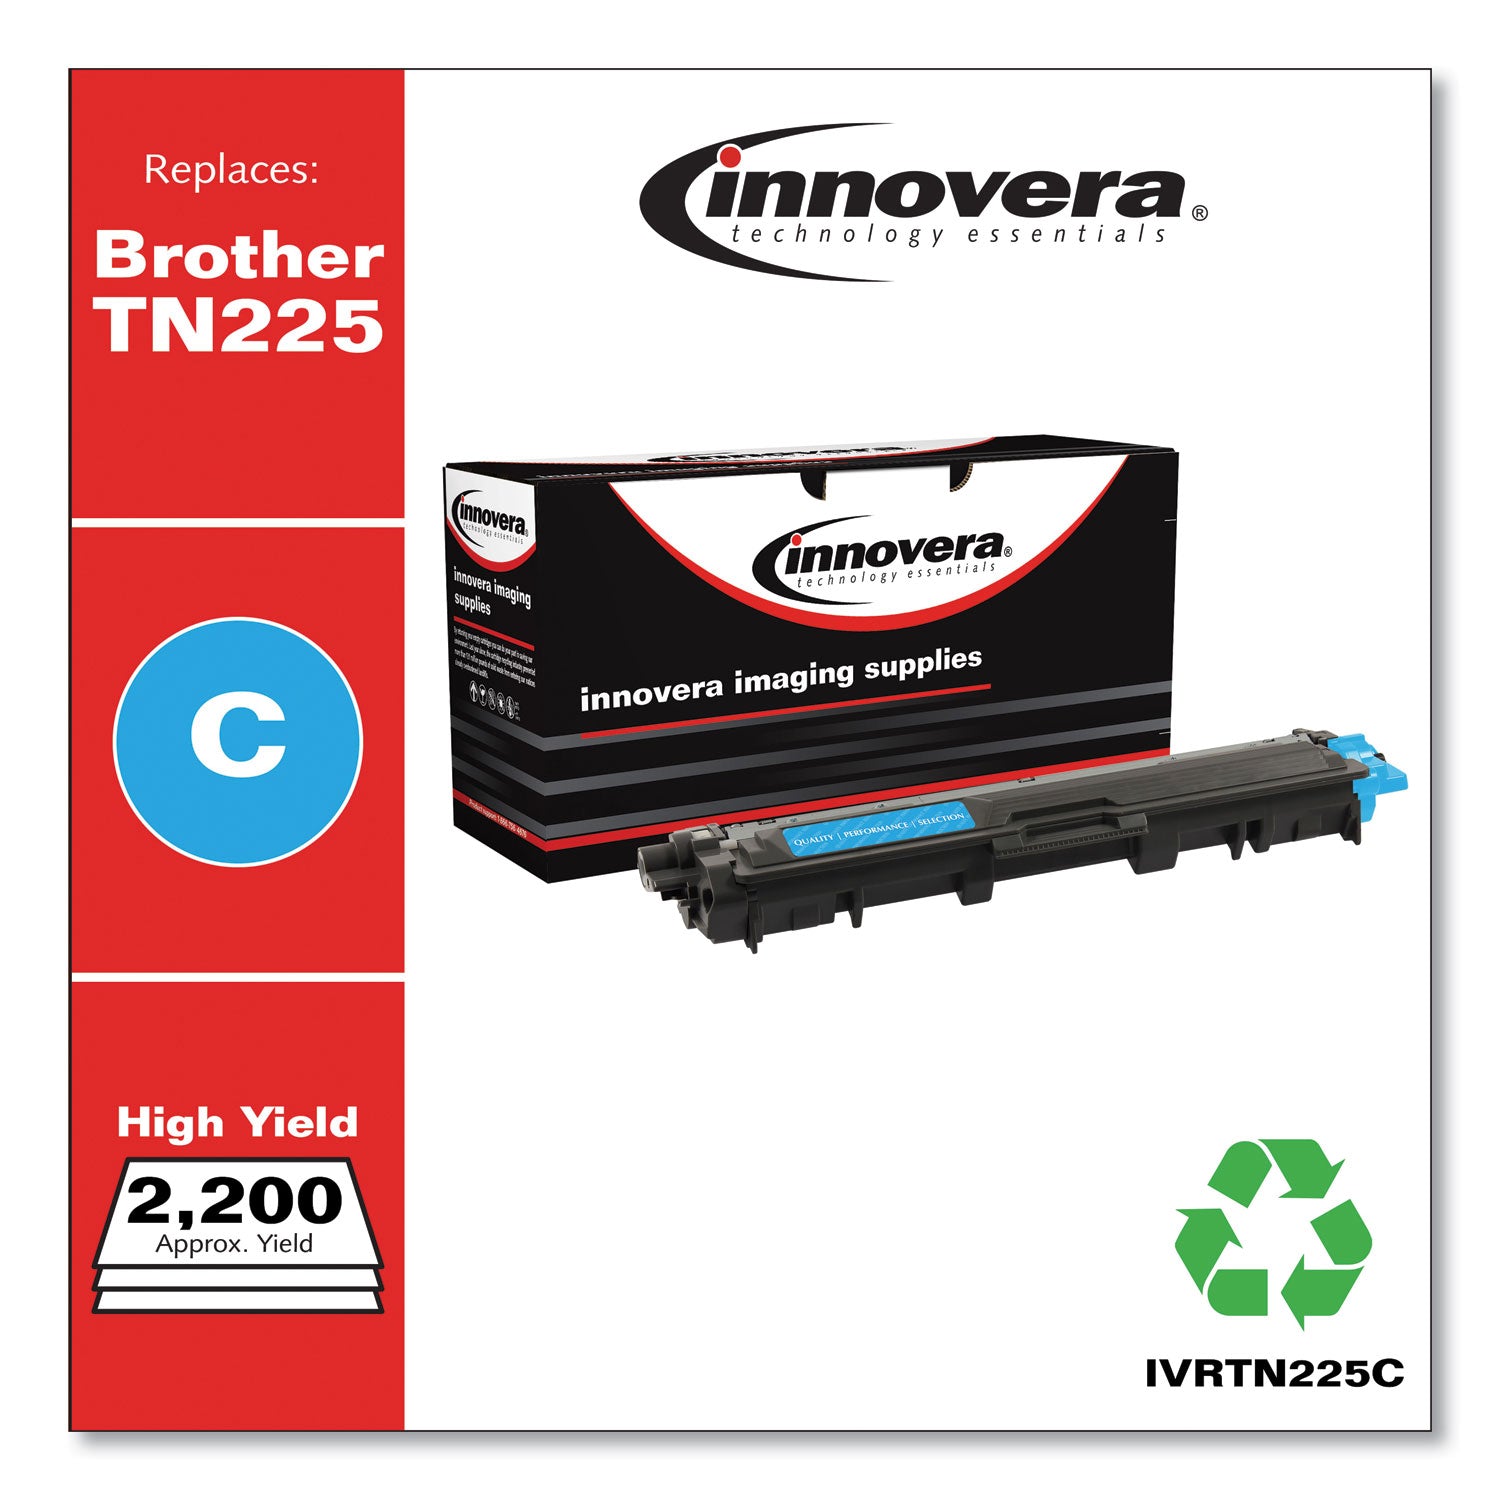 remanufactured-cyan-high-yield-toner-replacement-for-tn225c-2200-page-yield-ships-in-1-3-business-days_ivrtn225c - 2